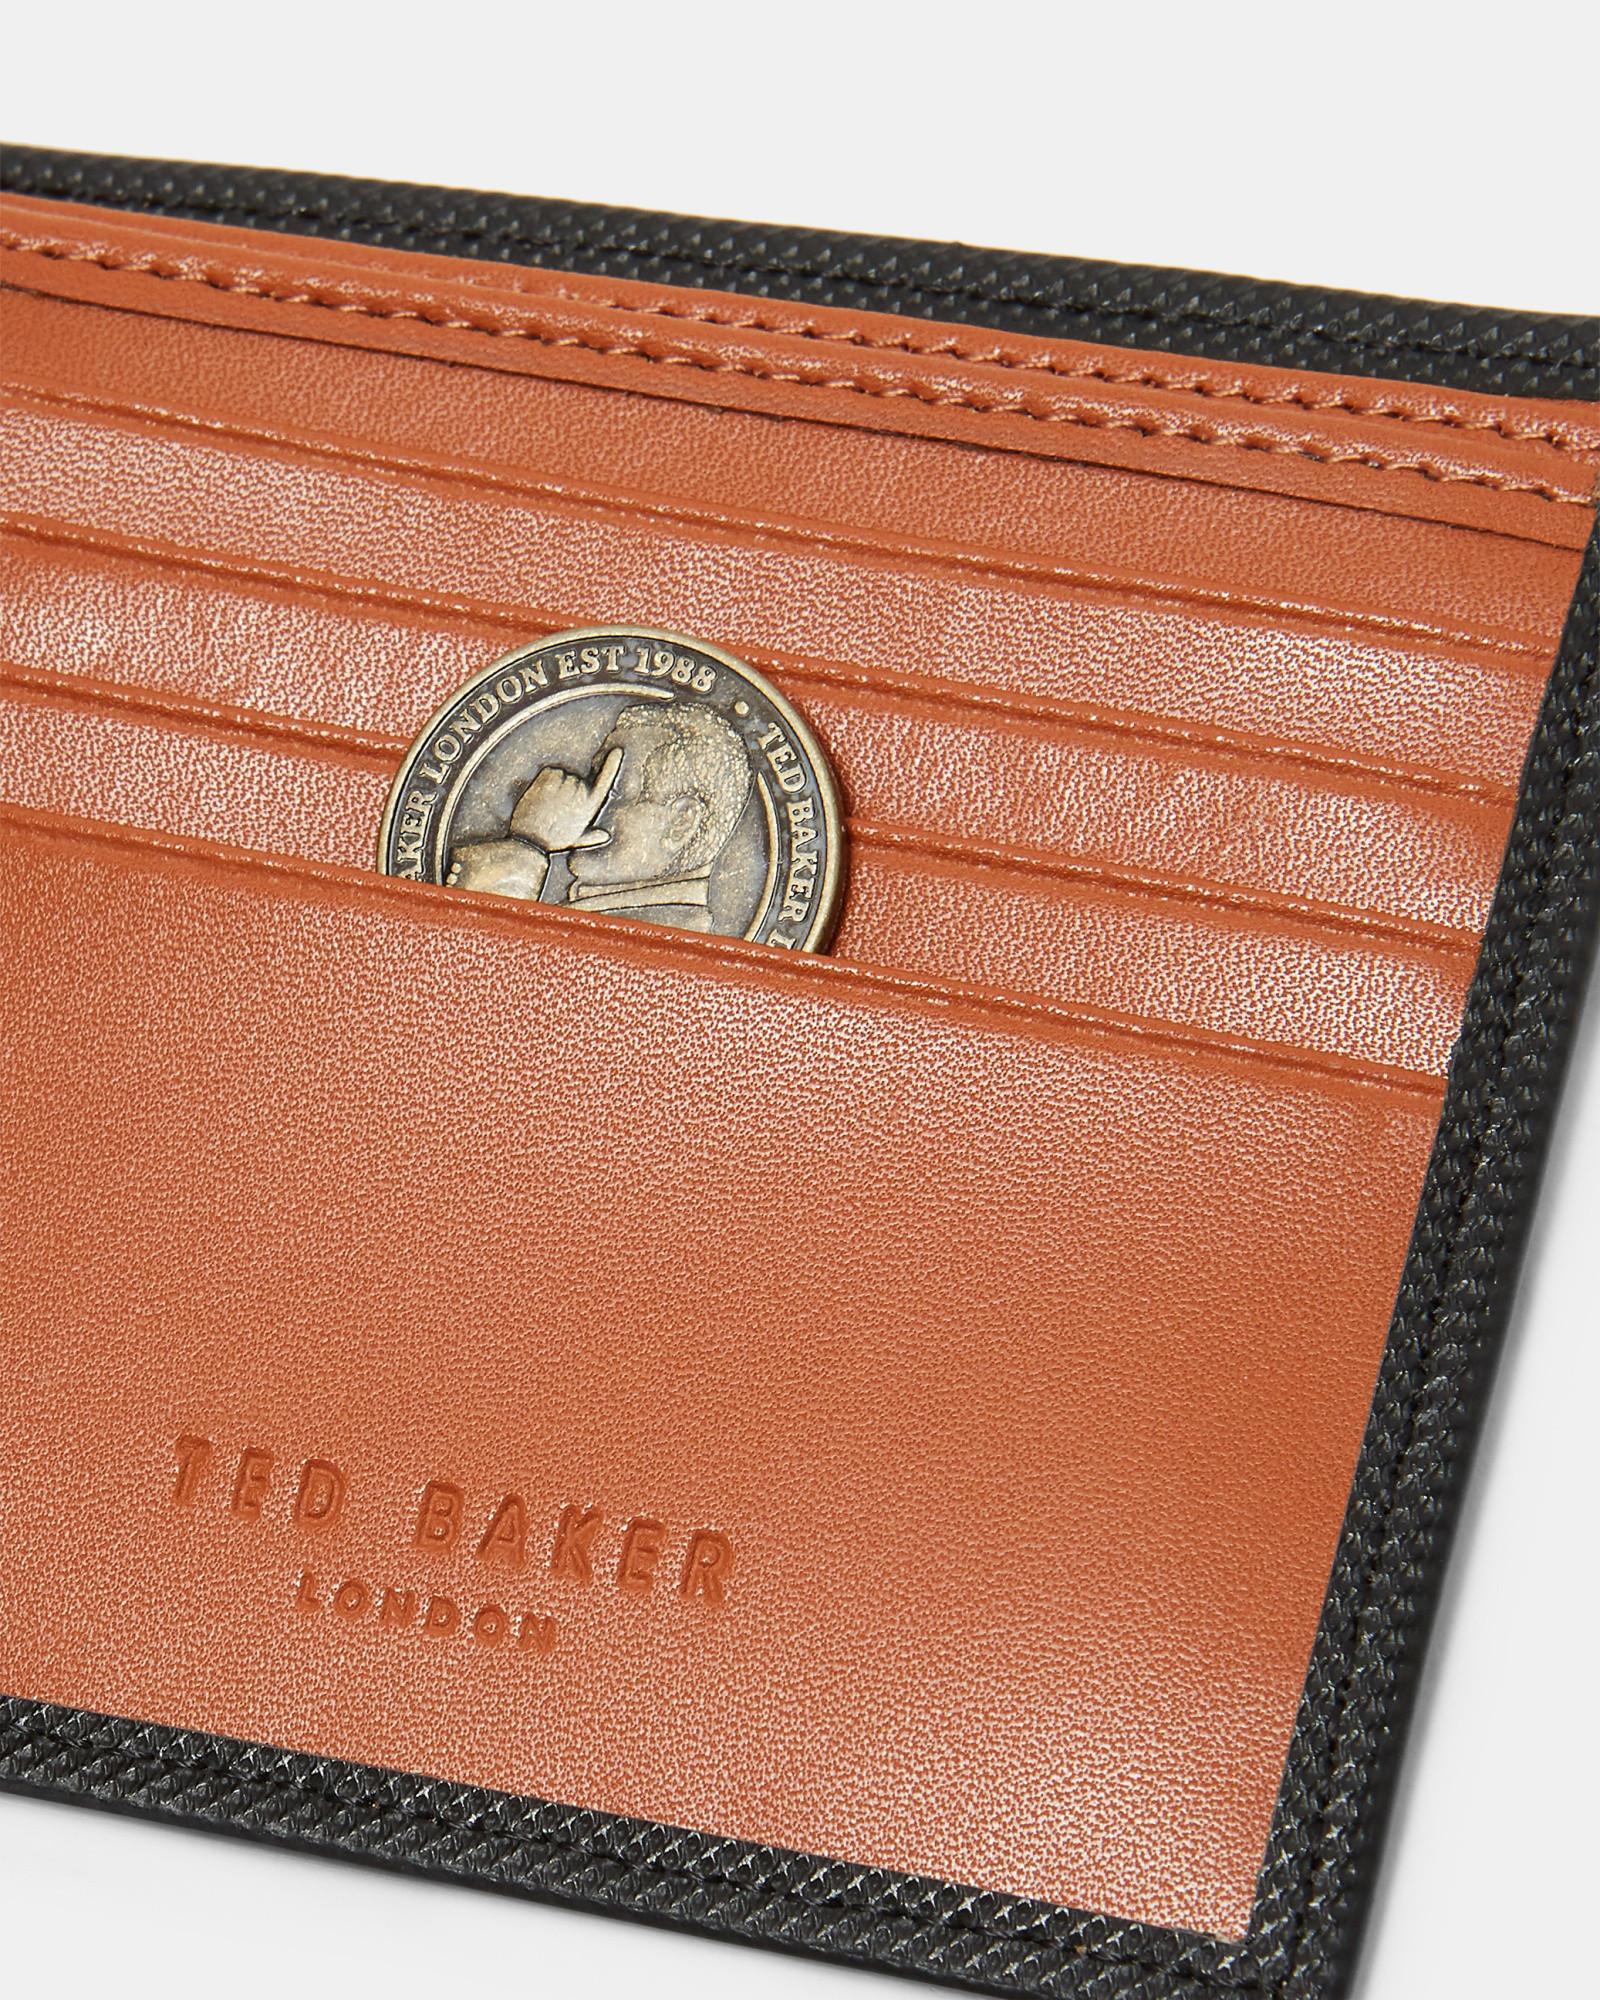 Ted Baker Perforated Leather Bi-fold Wallet in Black for Men - Lyst